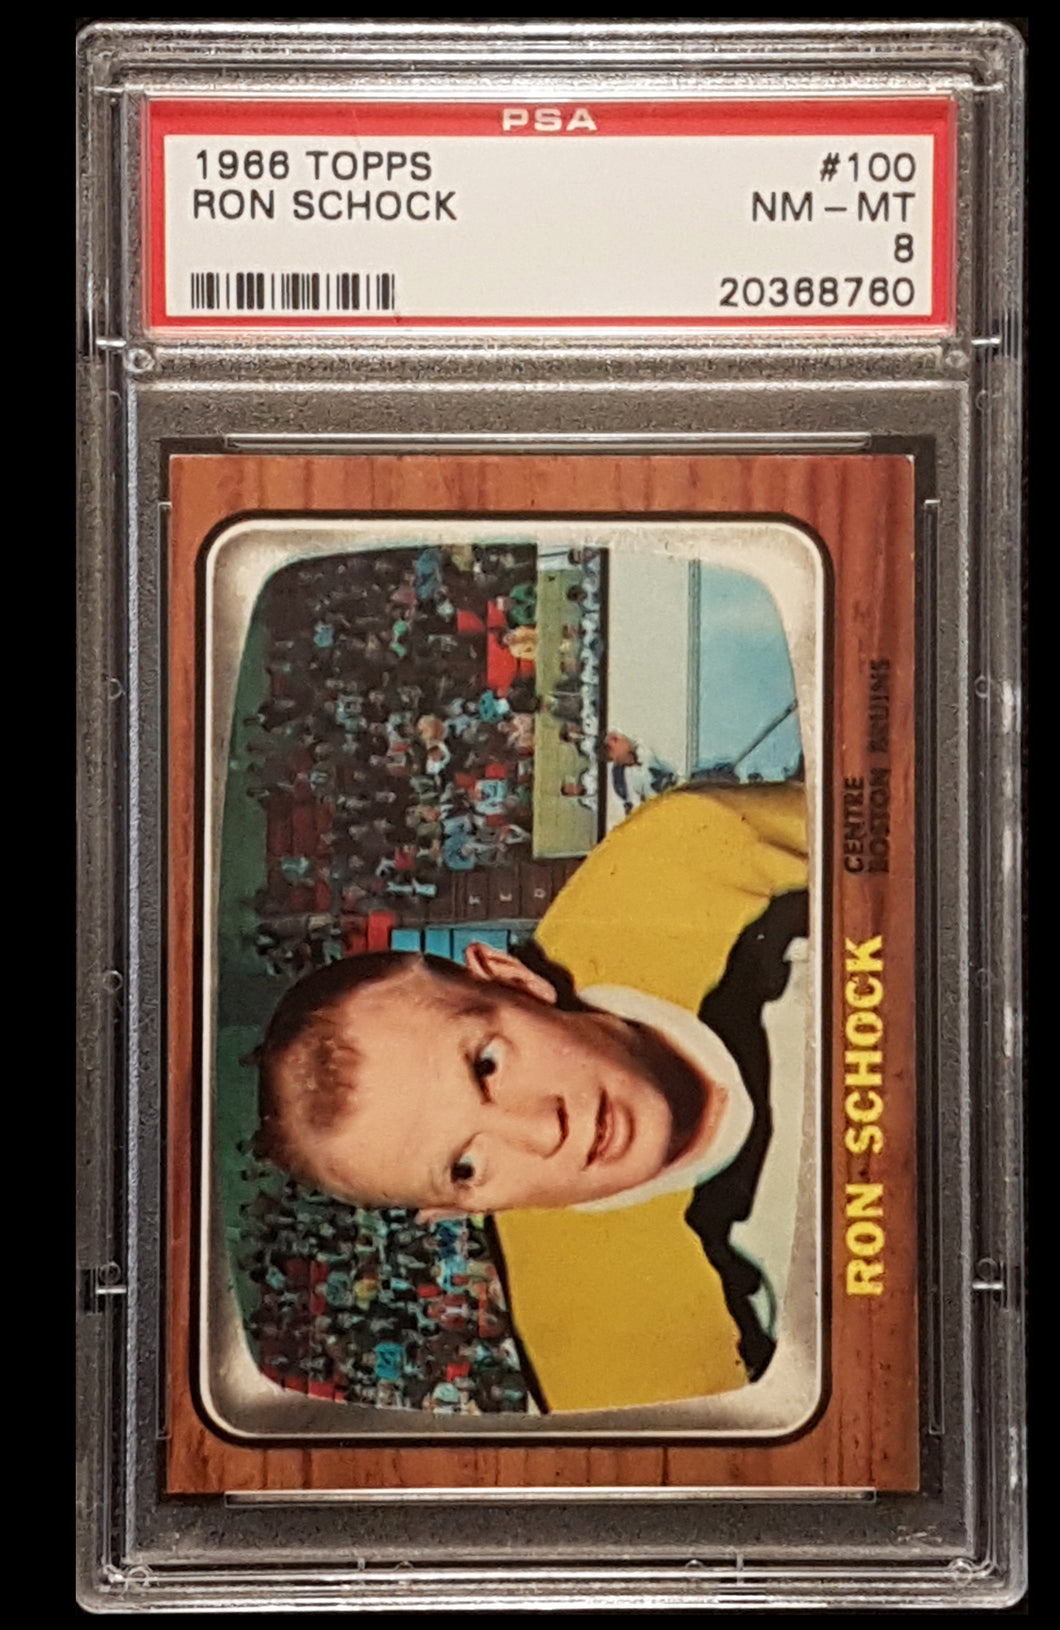 1966 Topps Hockey Ron Schock #100 - Last Card In Set - PSA 8 (Tough To Find)